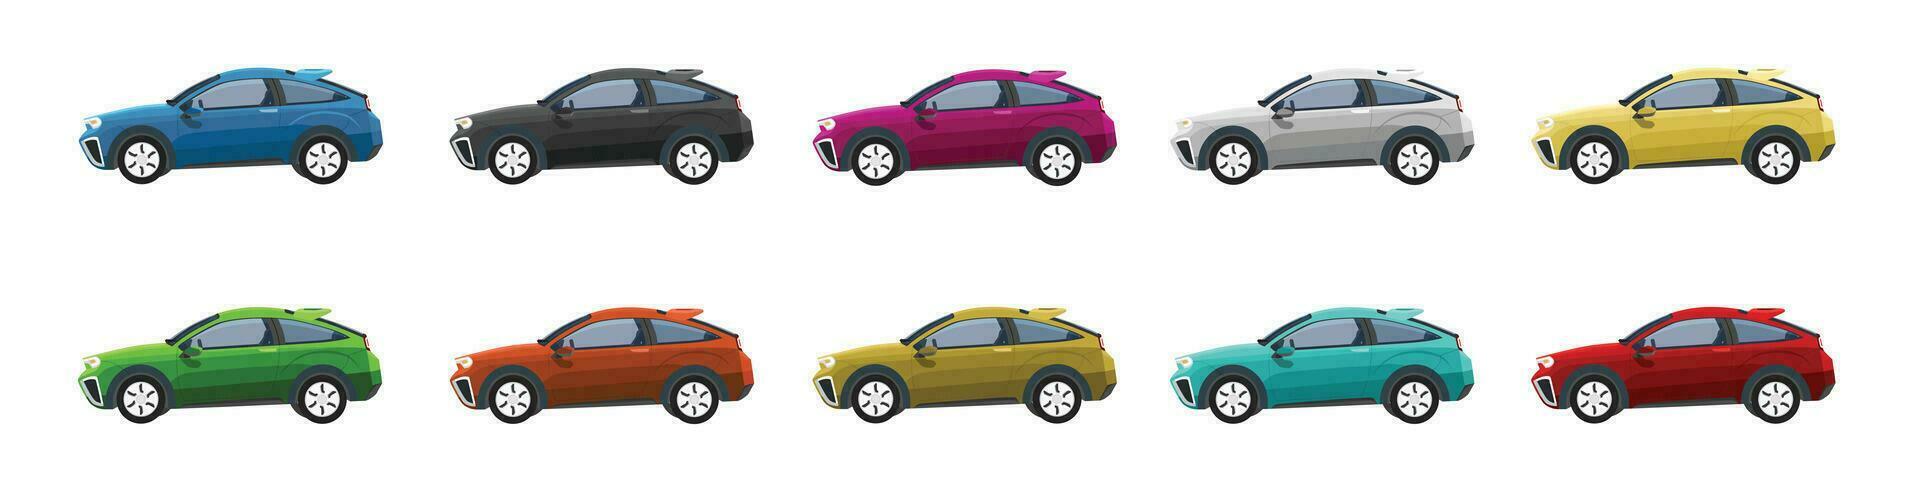 Vector or Illustrator of sport hatchback cars colorful collection. Design of electric vehicles car. Colorful cars with separate layers. On isolated white background.